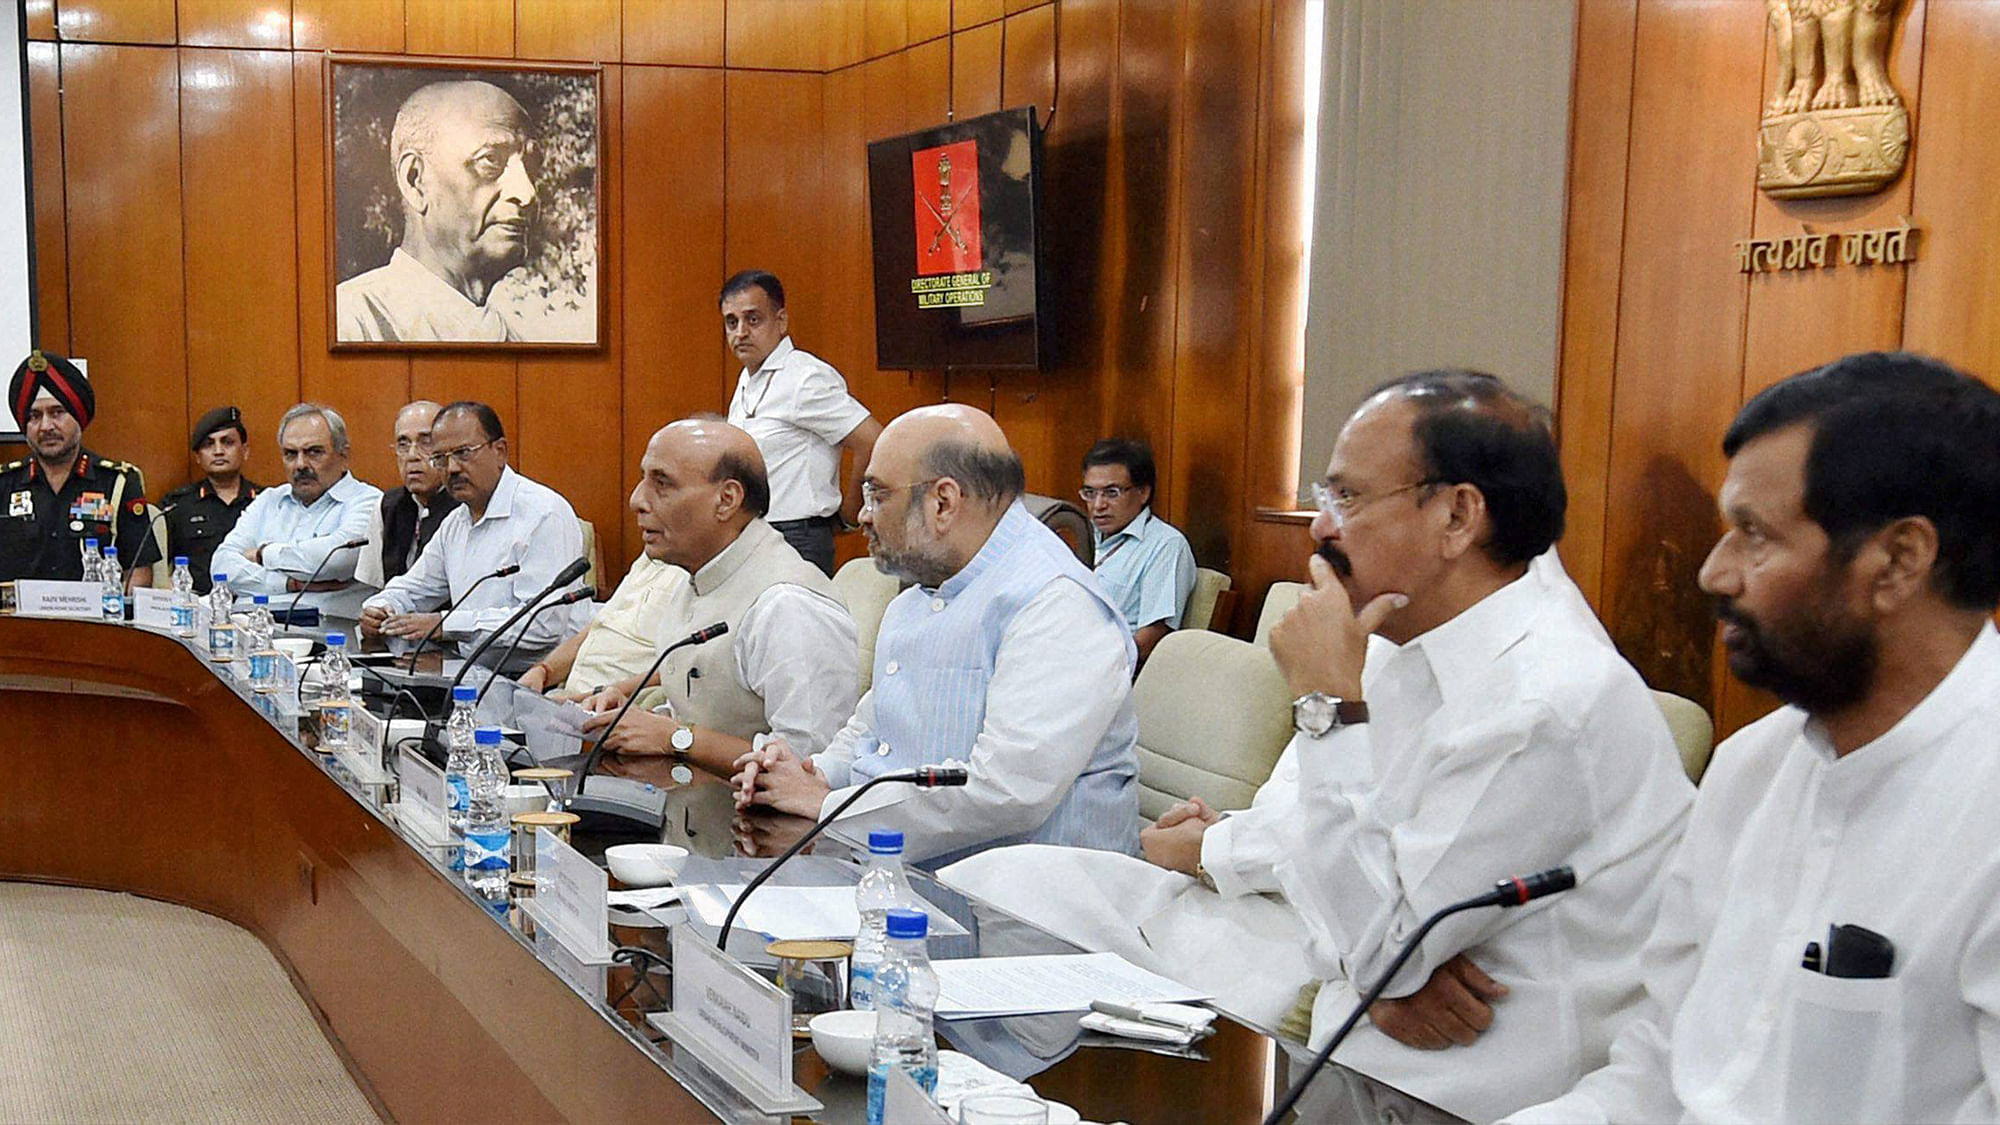 Home Minister Rajnath Singh, Union Ministers M Venkaiah Naidu, Ram Vilas Paswan, BJP chief Amit Shah and others during an all-party meeting in New Delhi on Thursday following Indian Army’s surgical strikes along the LoC on Wednesday night. (Photo: PTI)